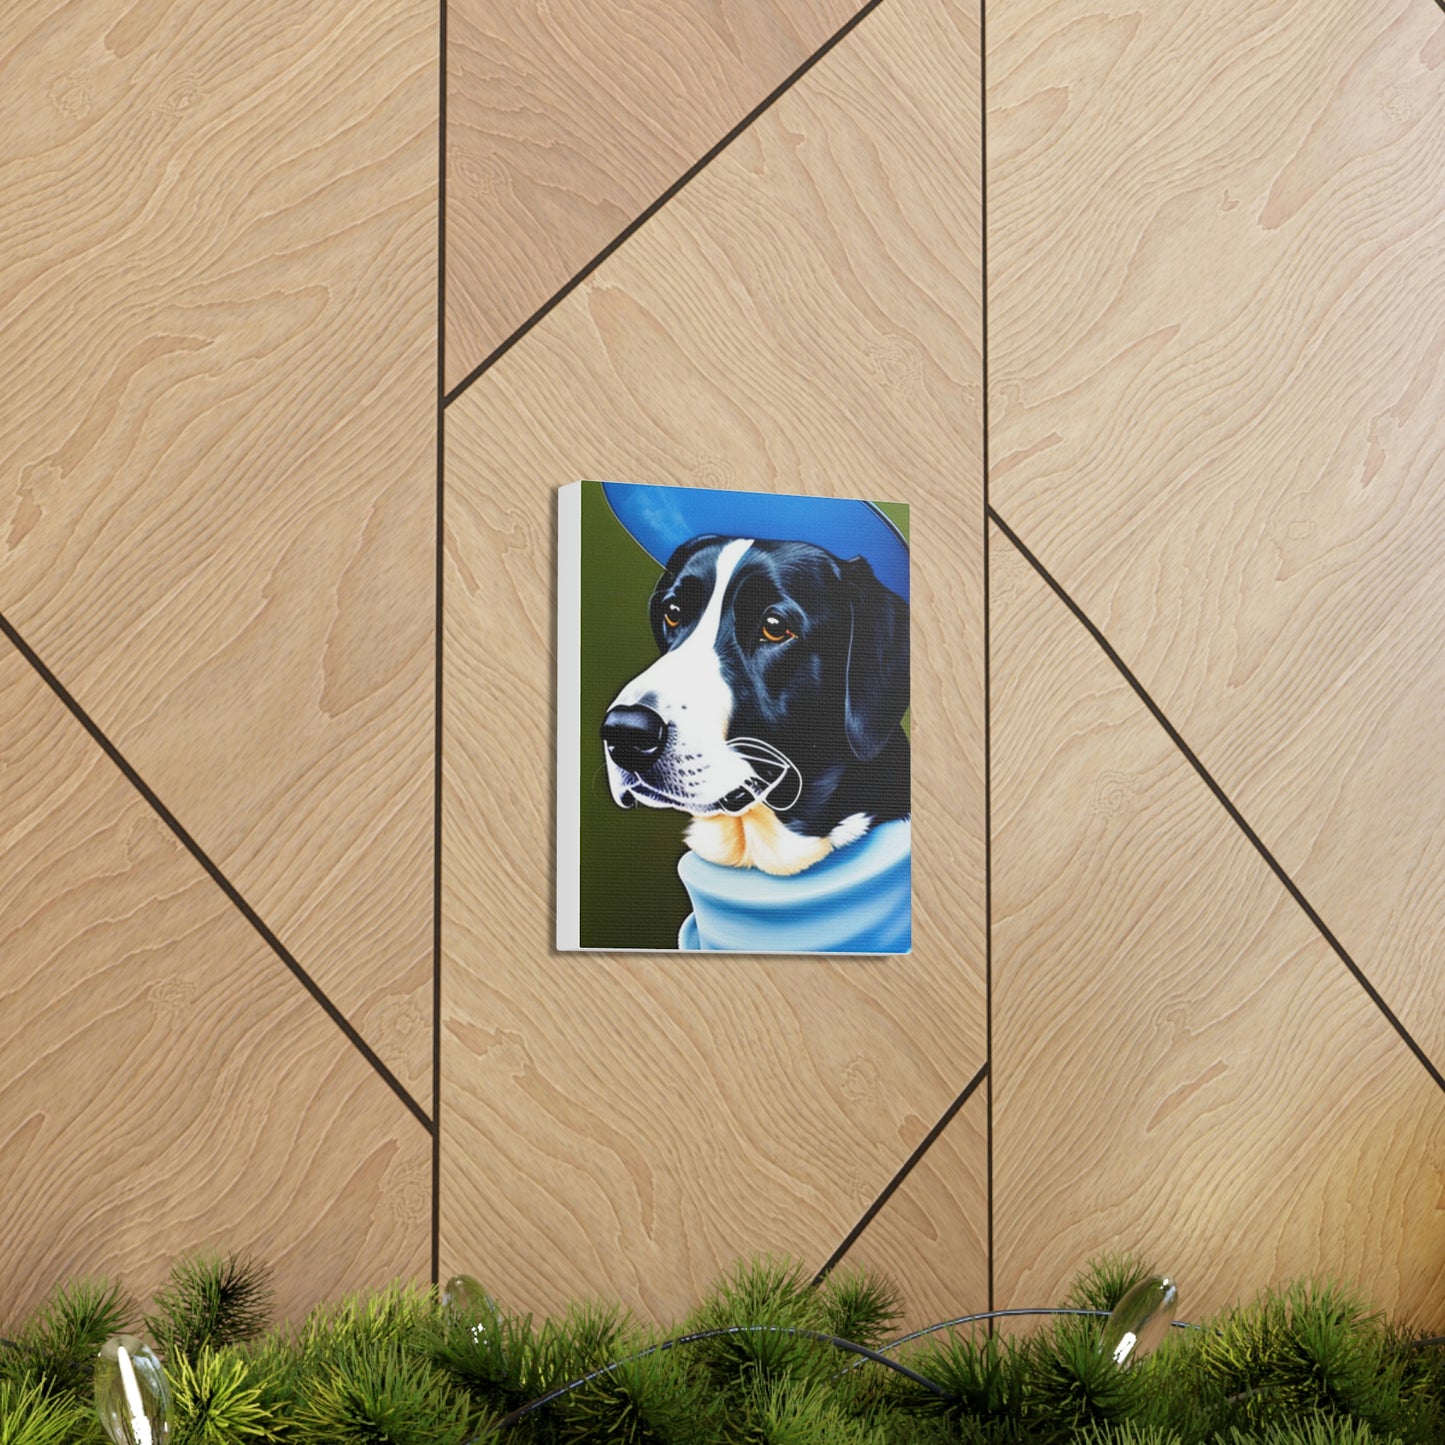 Dog wearing blue hat and sweater design Canvas Gallery Wraps poster